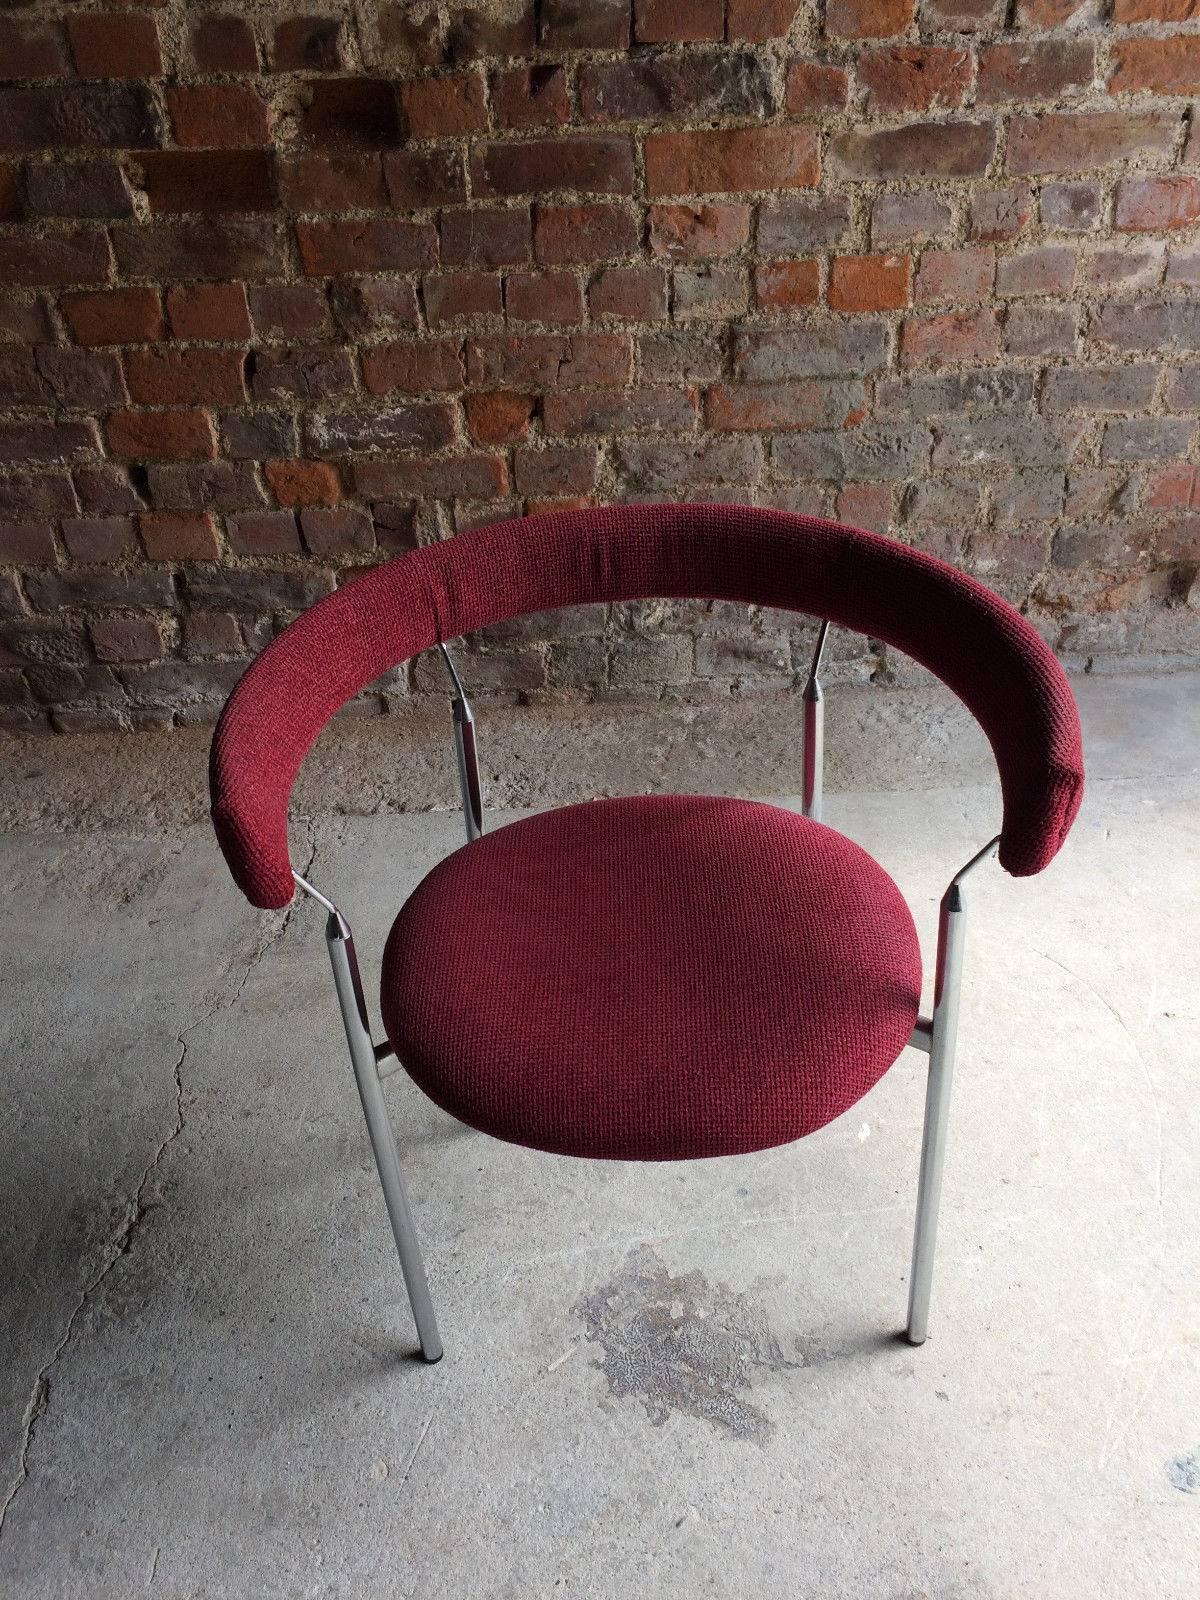 A stunning set of four Mid-Century Jan Lunde Knutsen 'Rondo' armchairs, 1960s Karl Sørlie & Sønner Sarpsborg Fabrikker Norway, fabulous chrome frames with original red fabric offered excellent condition, a fabulous and seductive seating design